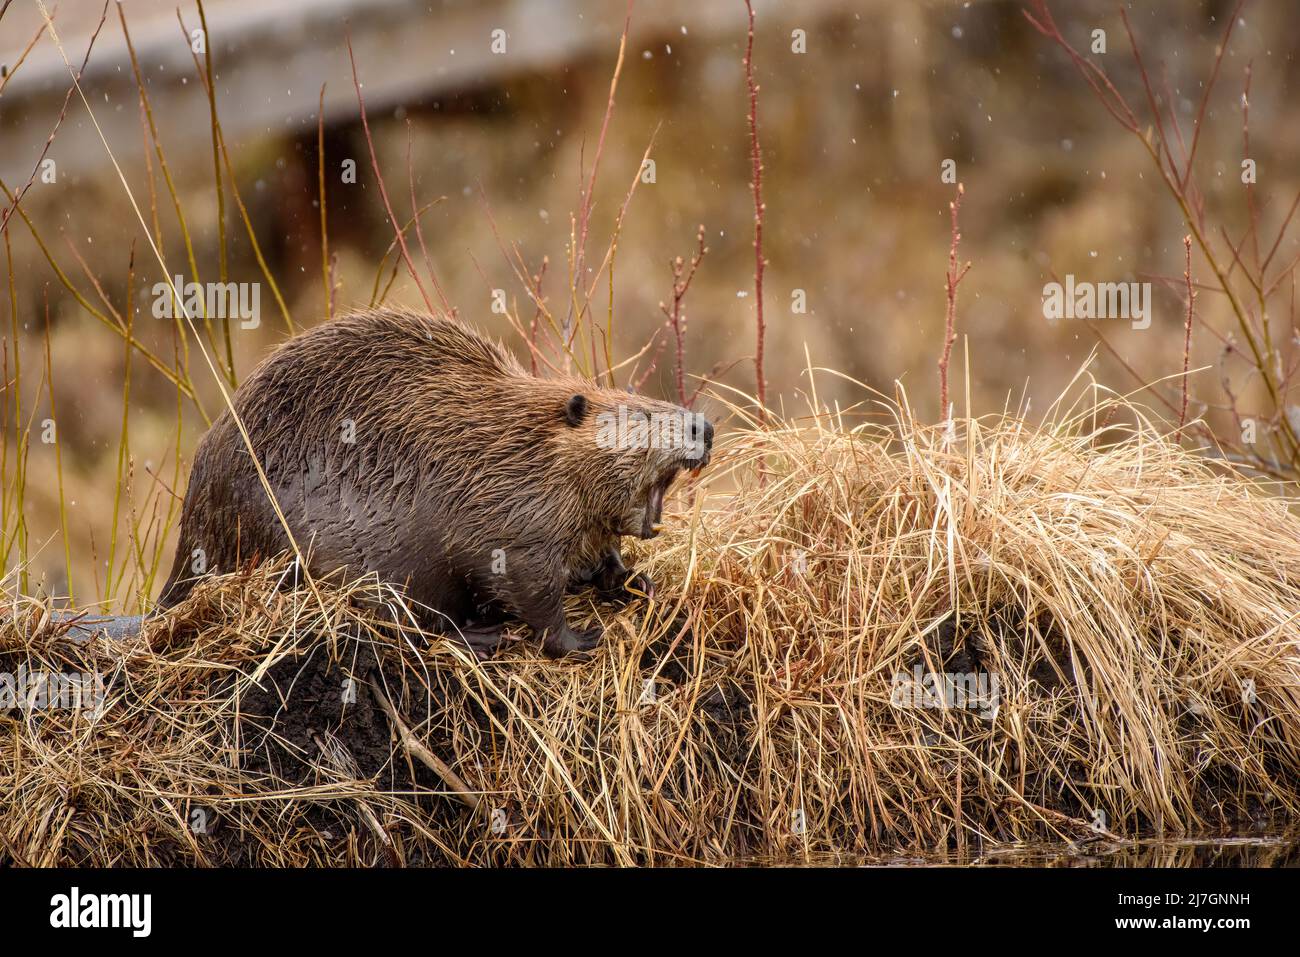 A large castor canadensis beaver yawning on grassy bank of pond Stock Photo